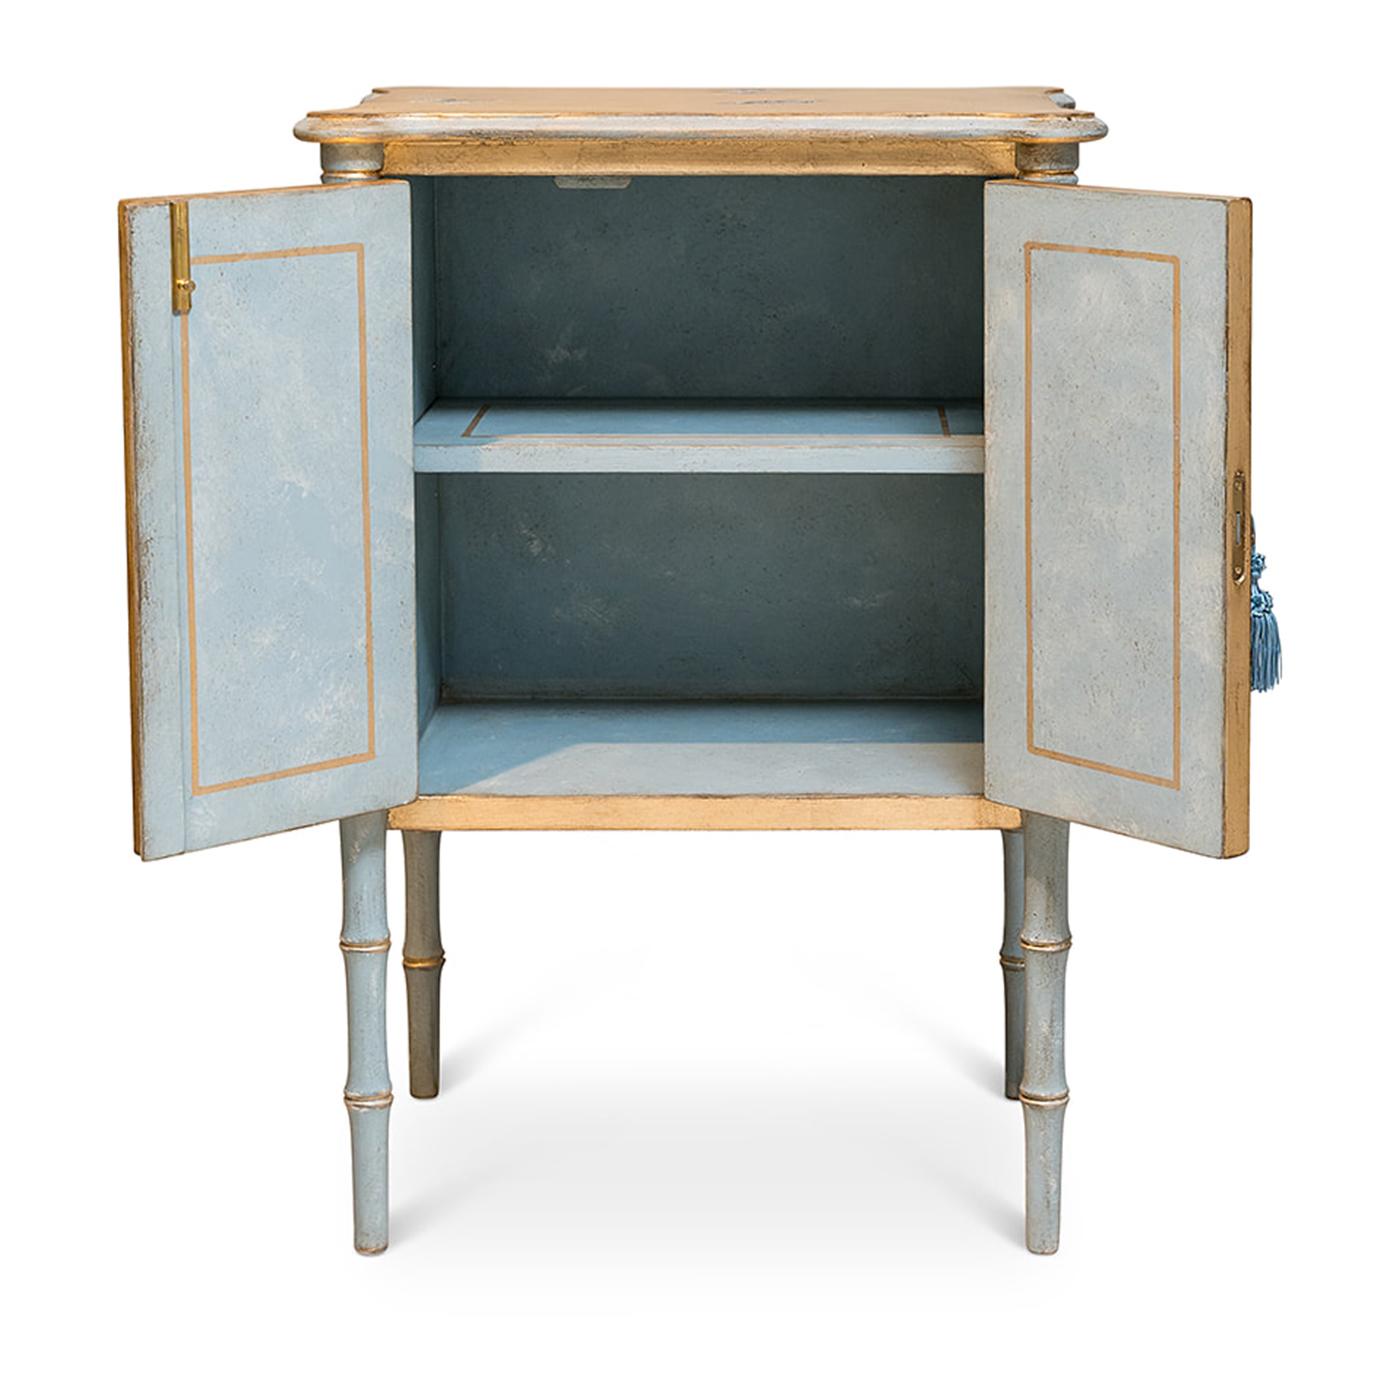 Introducing the Lombardia Bamboo nightstand, a whimsical masterpiece inspired by the kaleidoscope of colors found in a group of butterflies. Crafted with gold leaf accents and blue-grey bamboo, this nightstand adds a touch of enchantment to your